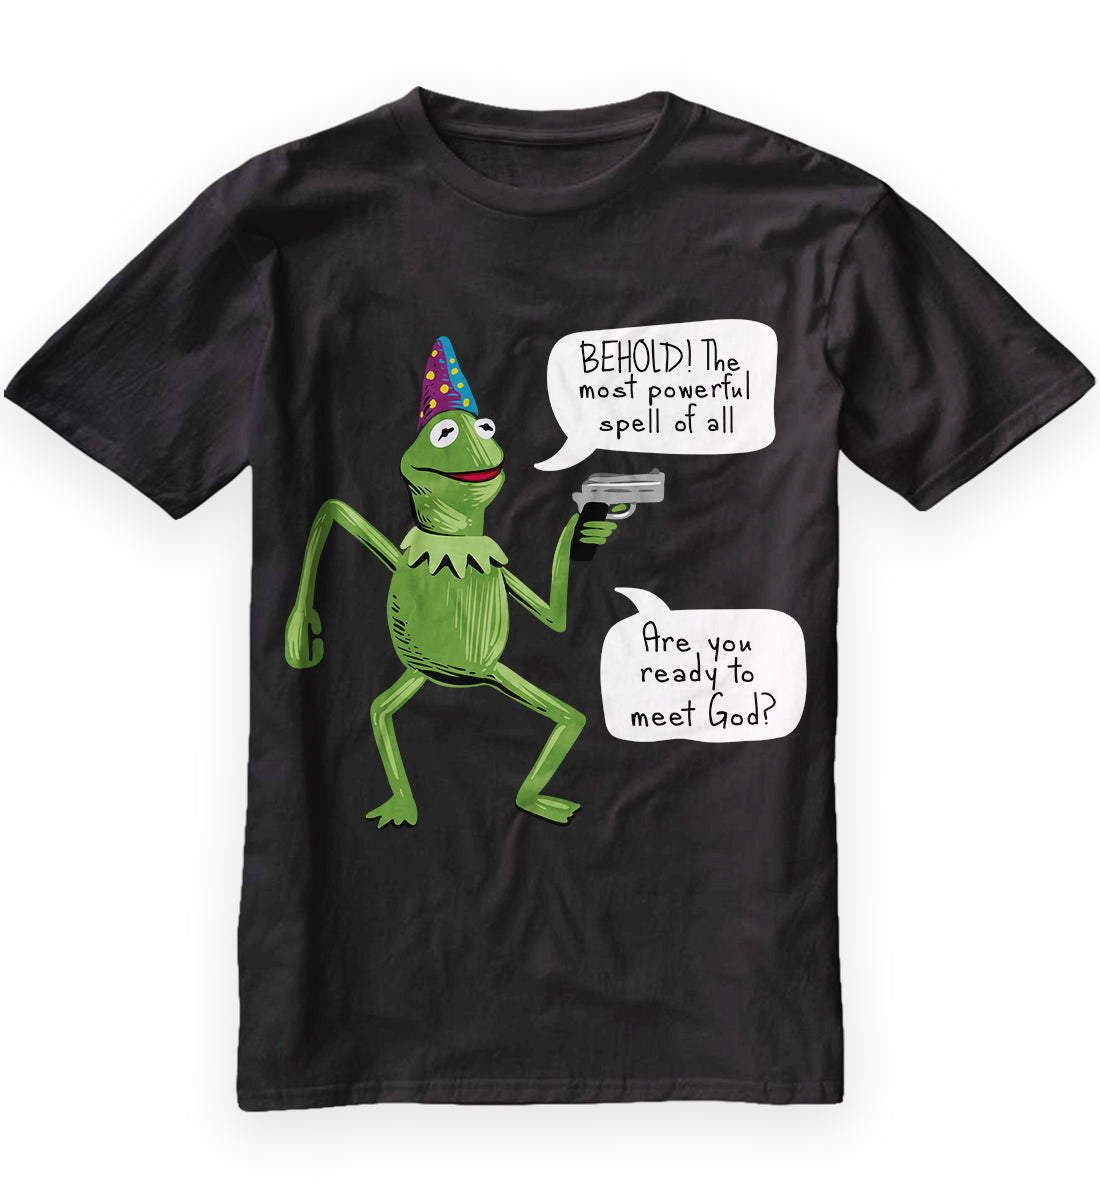 Wizard Kermit with Gun behold the most powerful spell of all. are you ready to meet god Classic T-Shirt